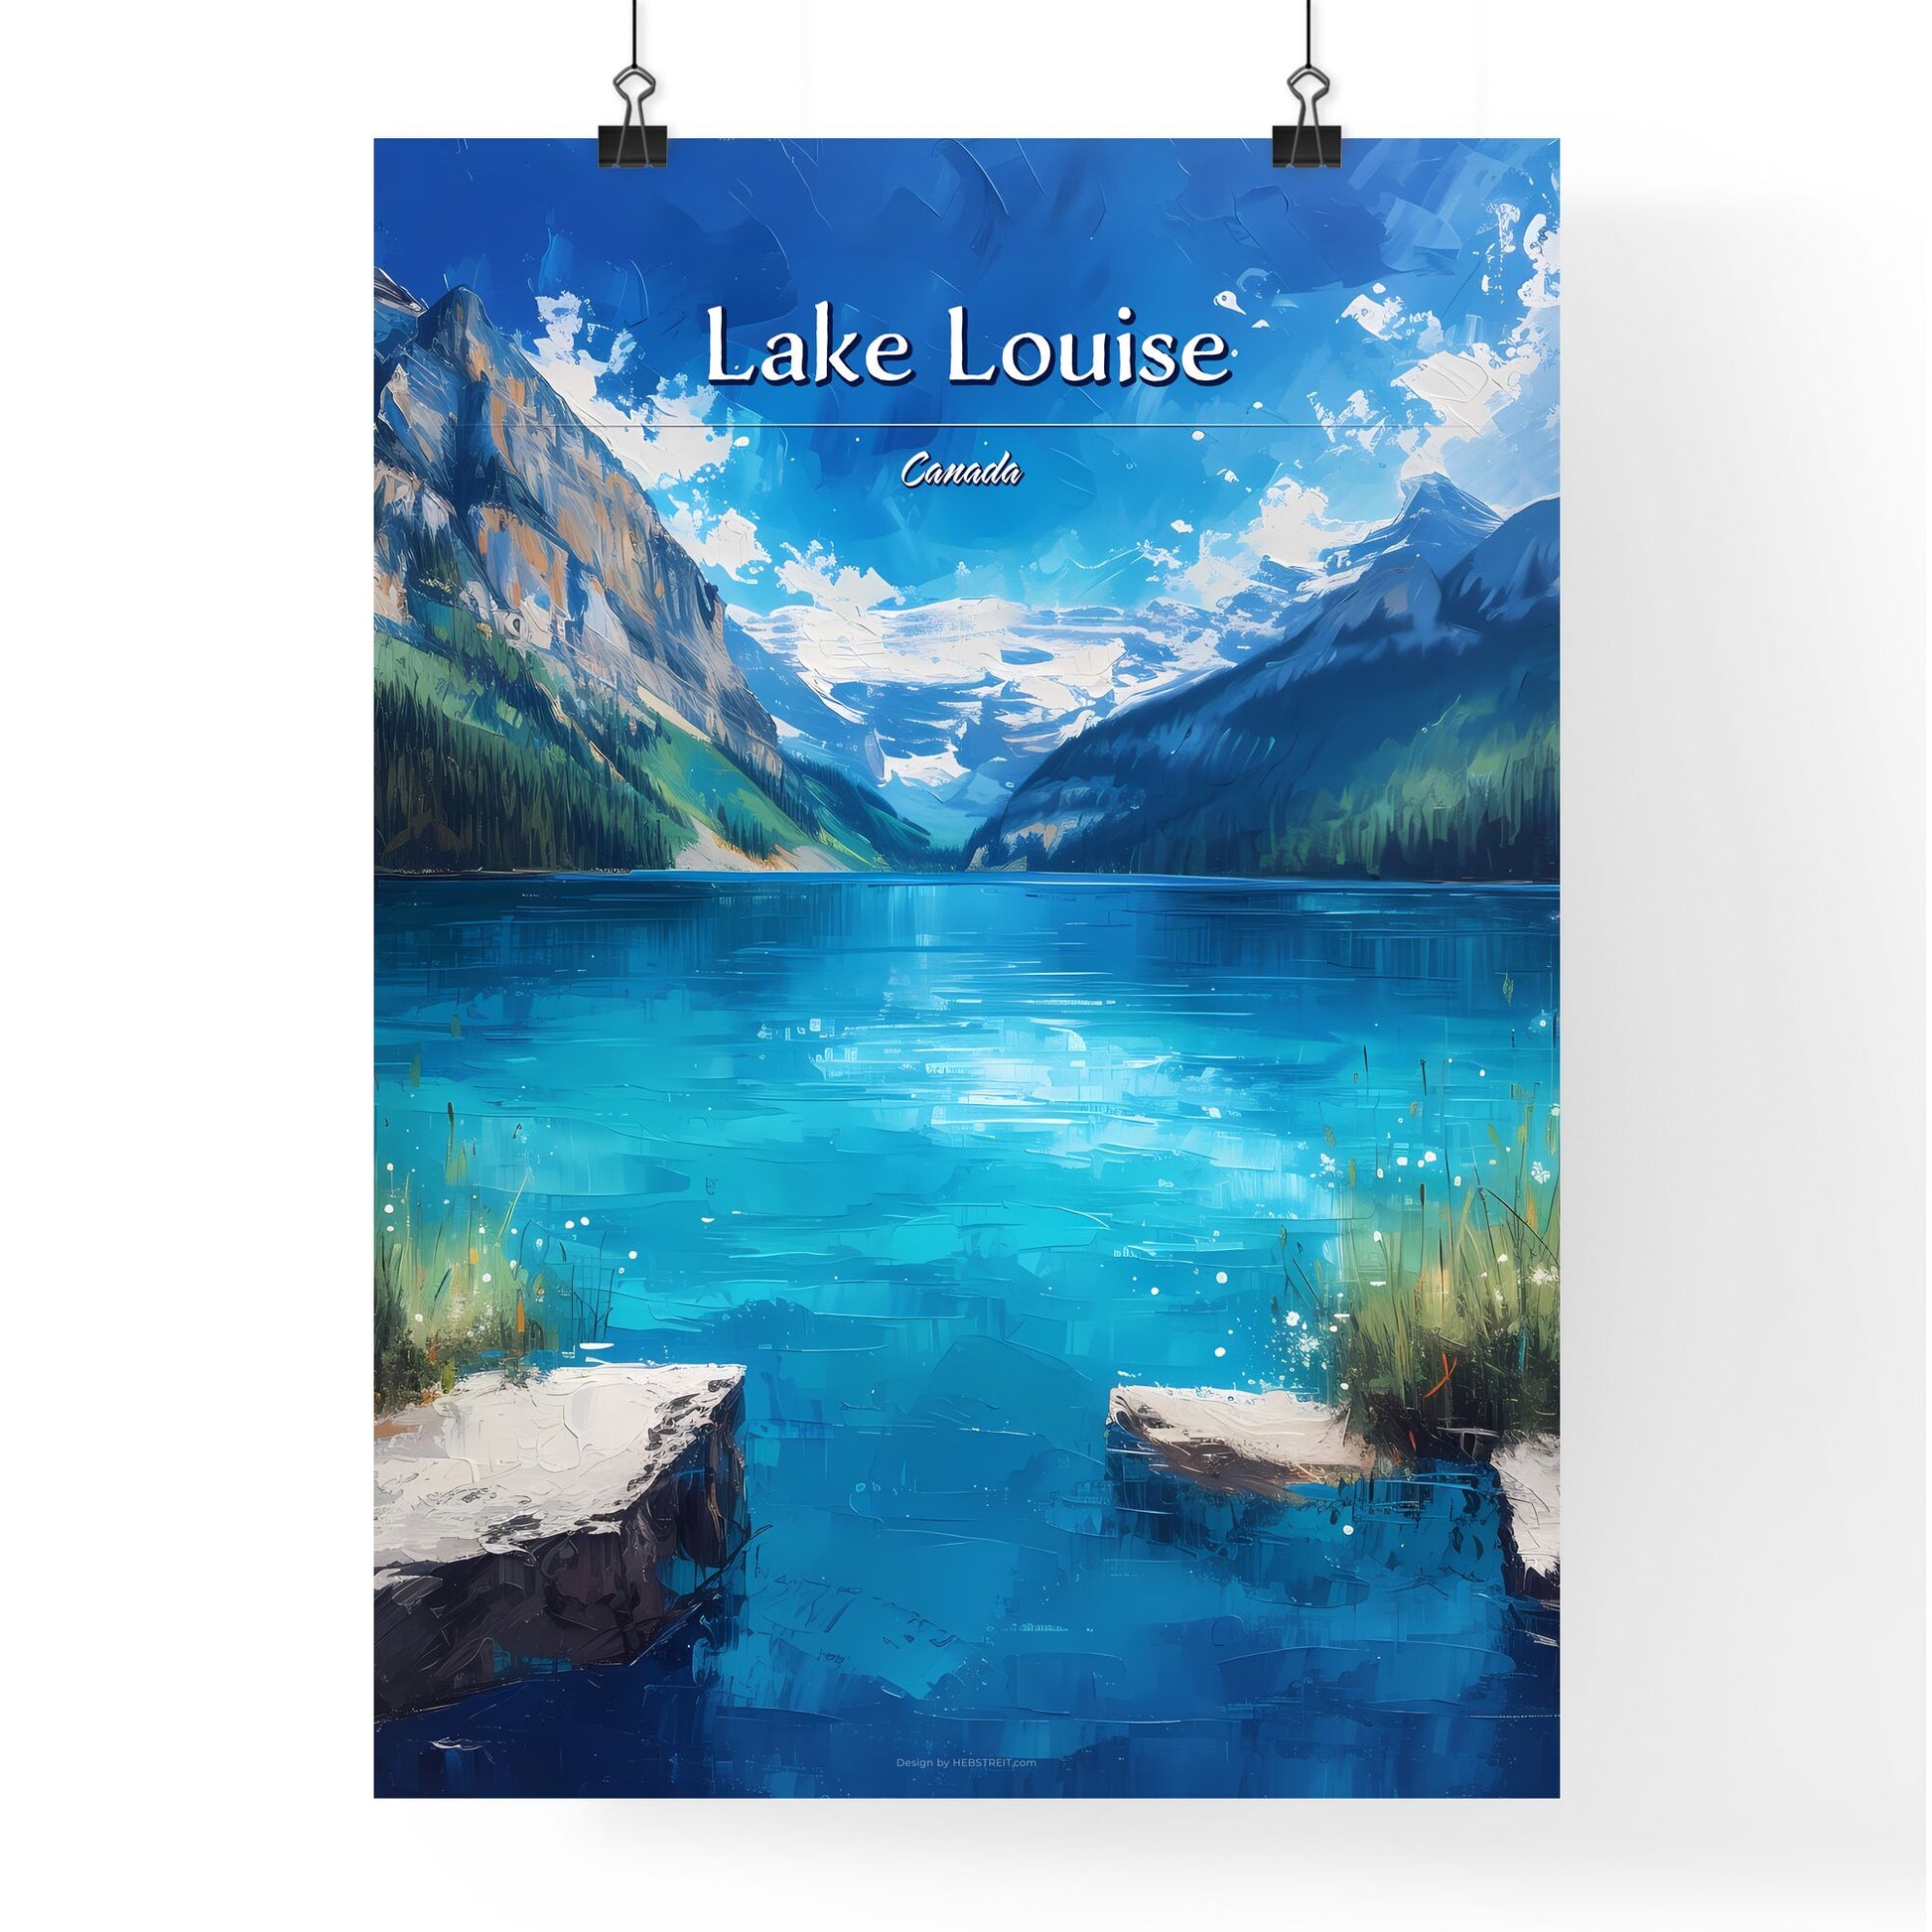 Lake Louise, Canada - Art print of a close up of a dna Default Title